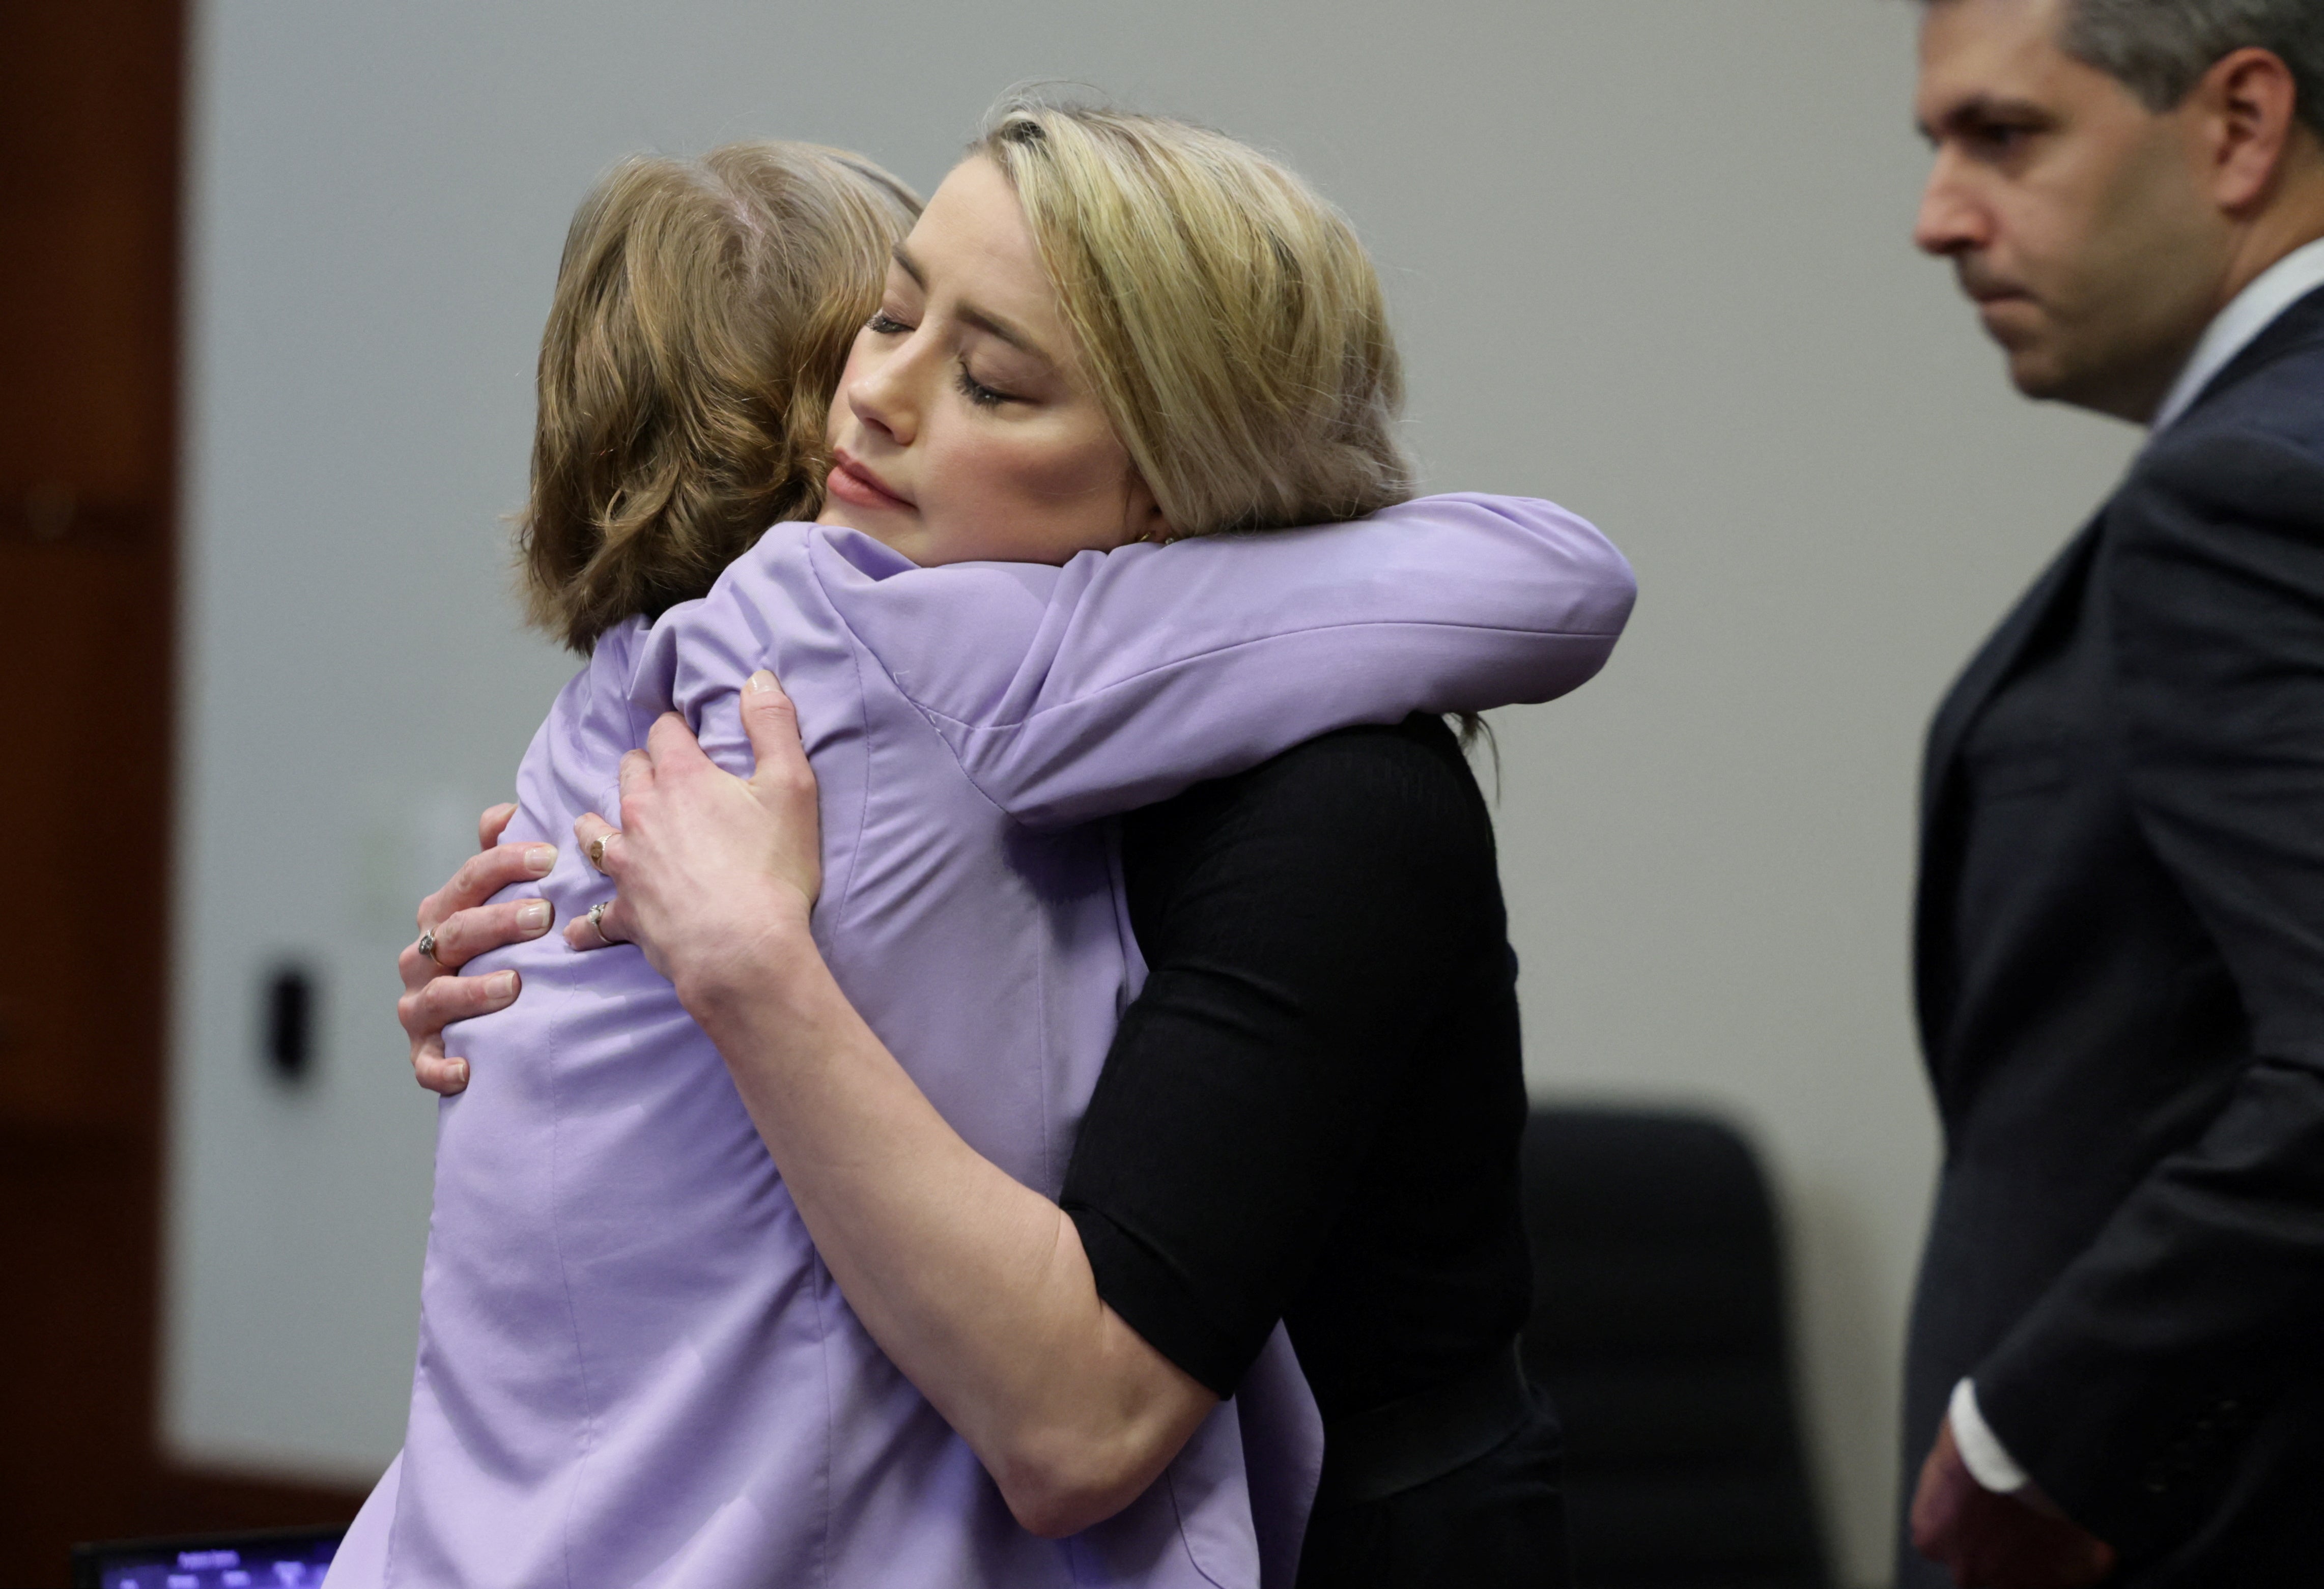 Actor Amber Heard hugs her lawyer Elaine Bredehoft after the jury said that they believe she defamed ex-husband Johnny Depp